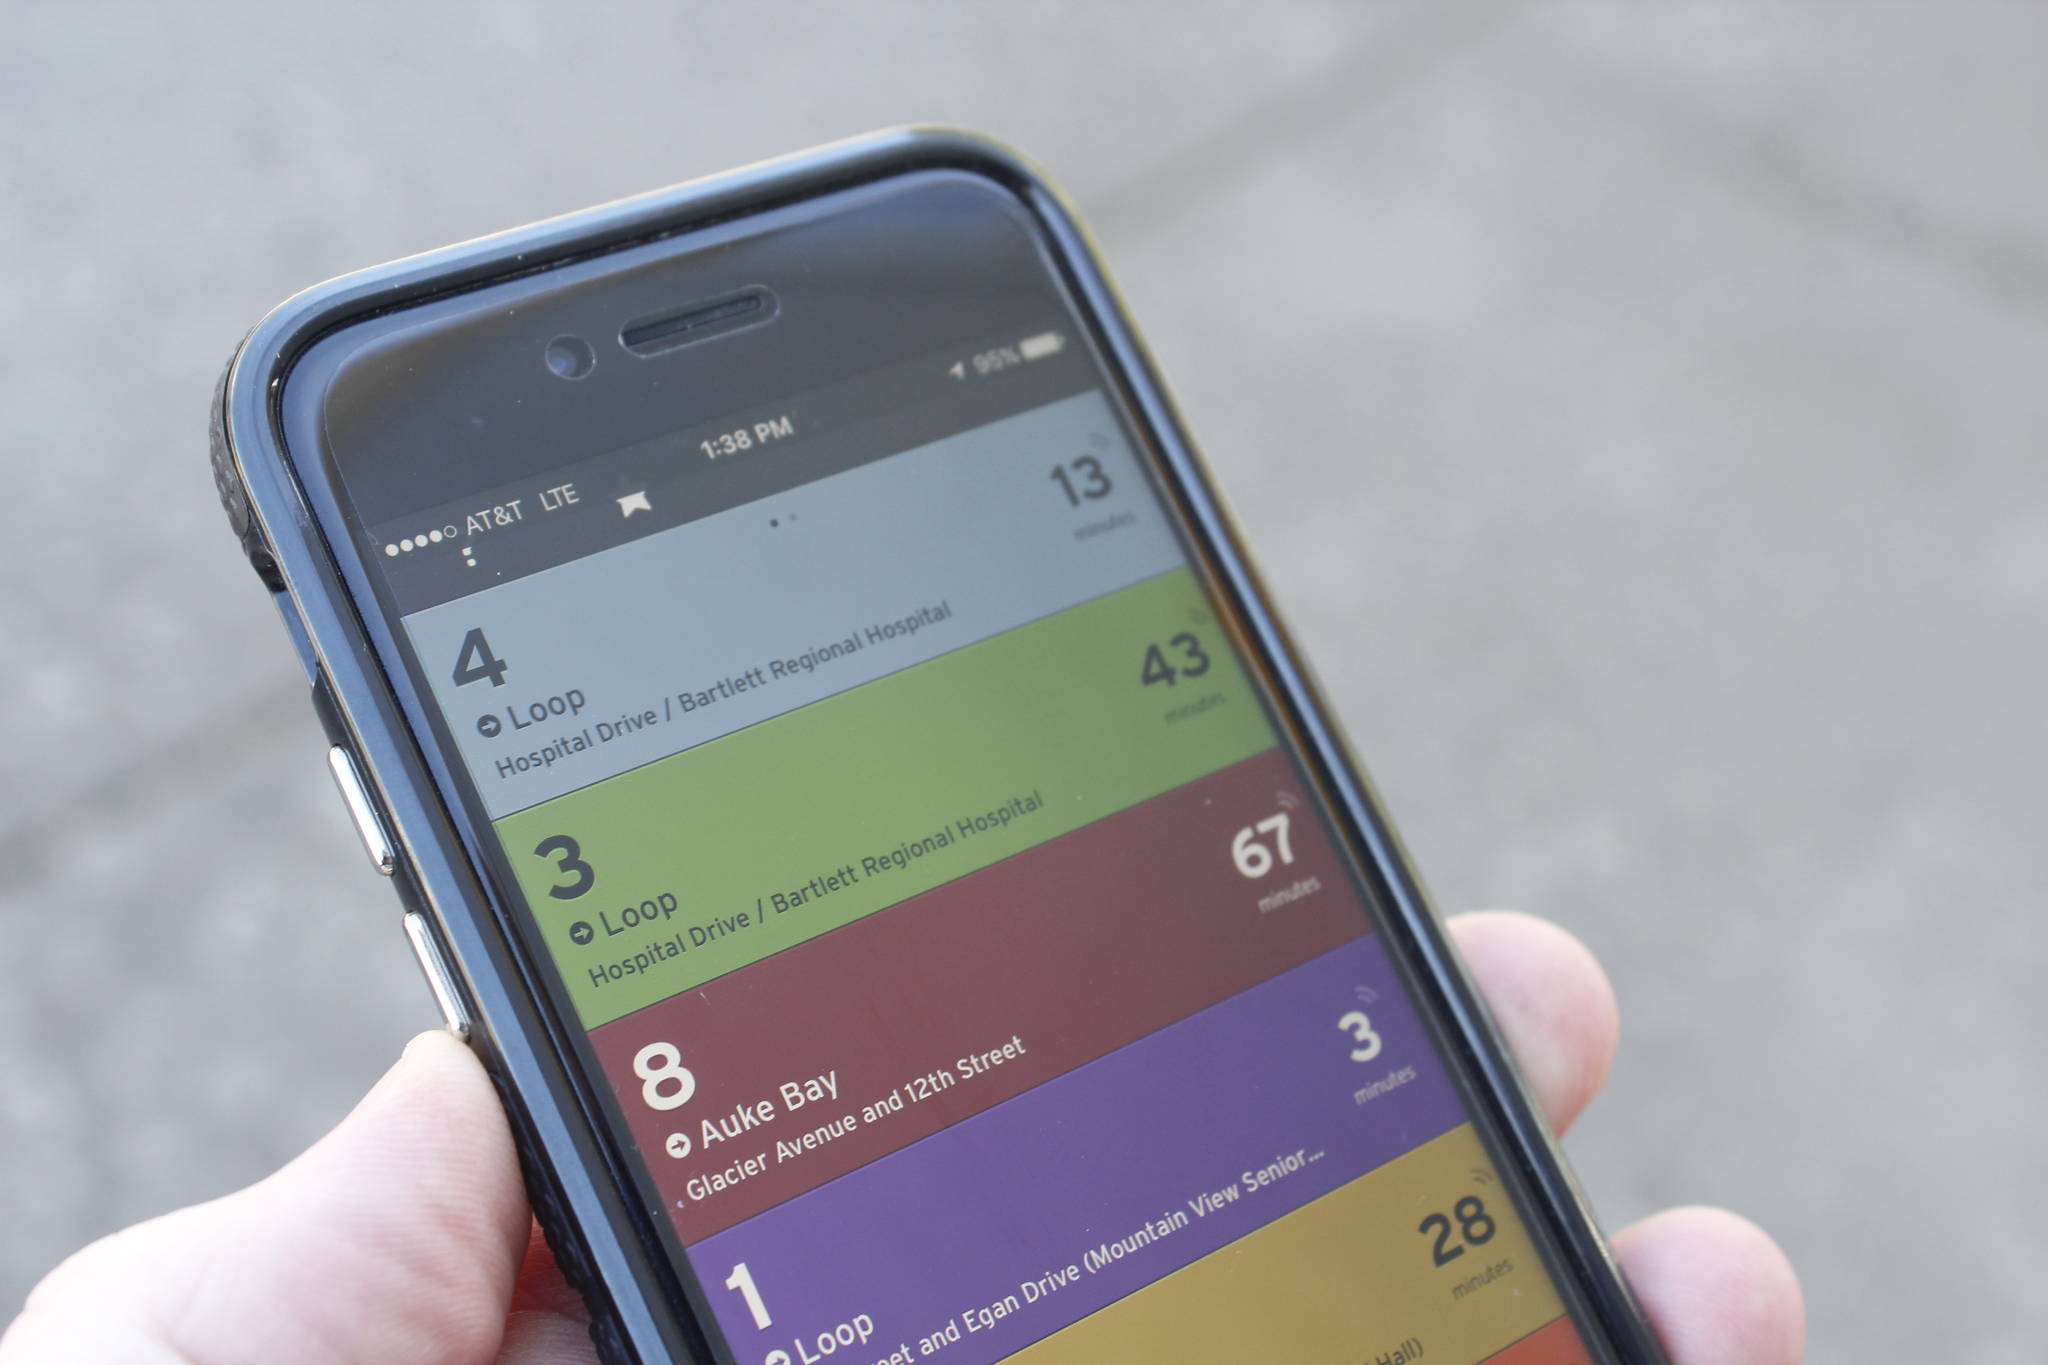 Capital Transit is now using the Transit app, the same one used by public transportation companies in Boston, Toronto and other major cities. (Alex McCarthy | Juneau Empire)